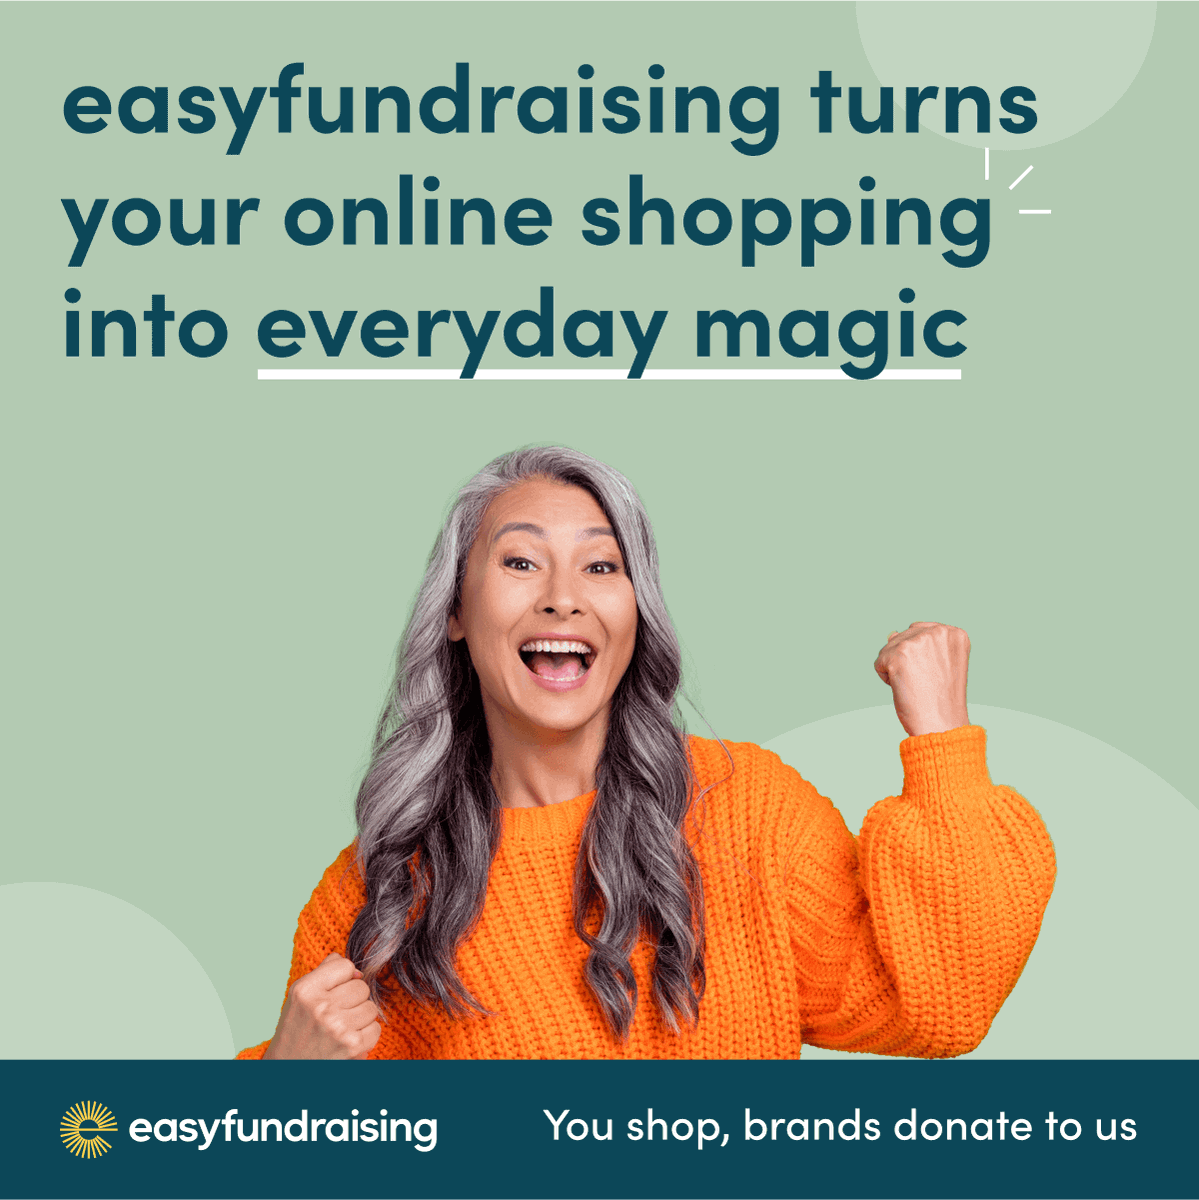 We are now registered on Easy Fundraising @easyuk! Did you know you can fundraise for us, simply by shopping online? It’s easy and completely FREE! These donations really mount up, so please sign up to support us at bit.ly/3KaRlHw